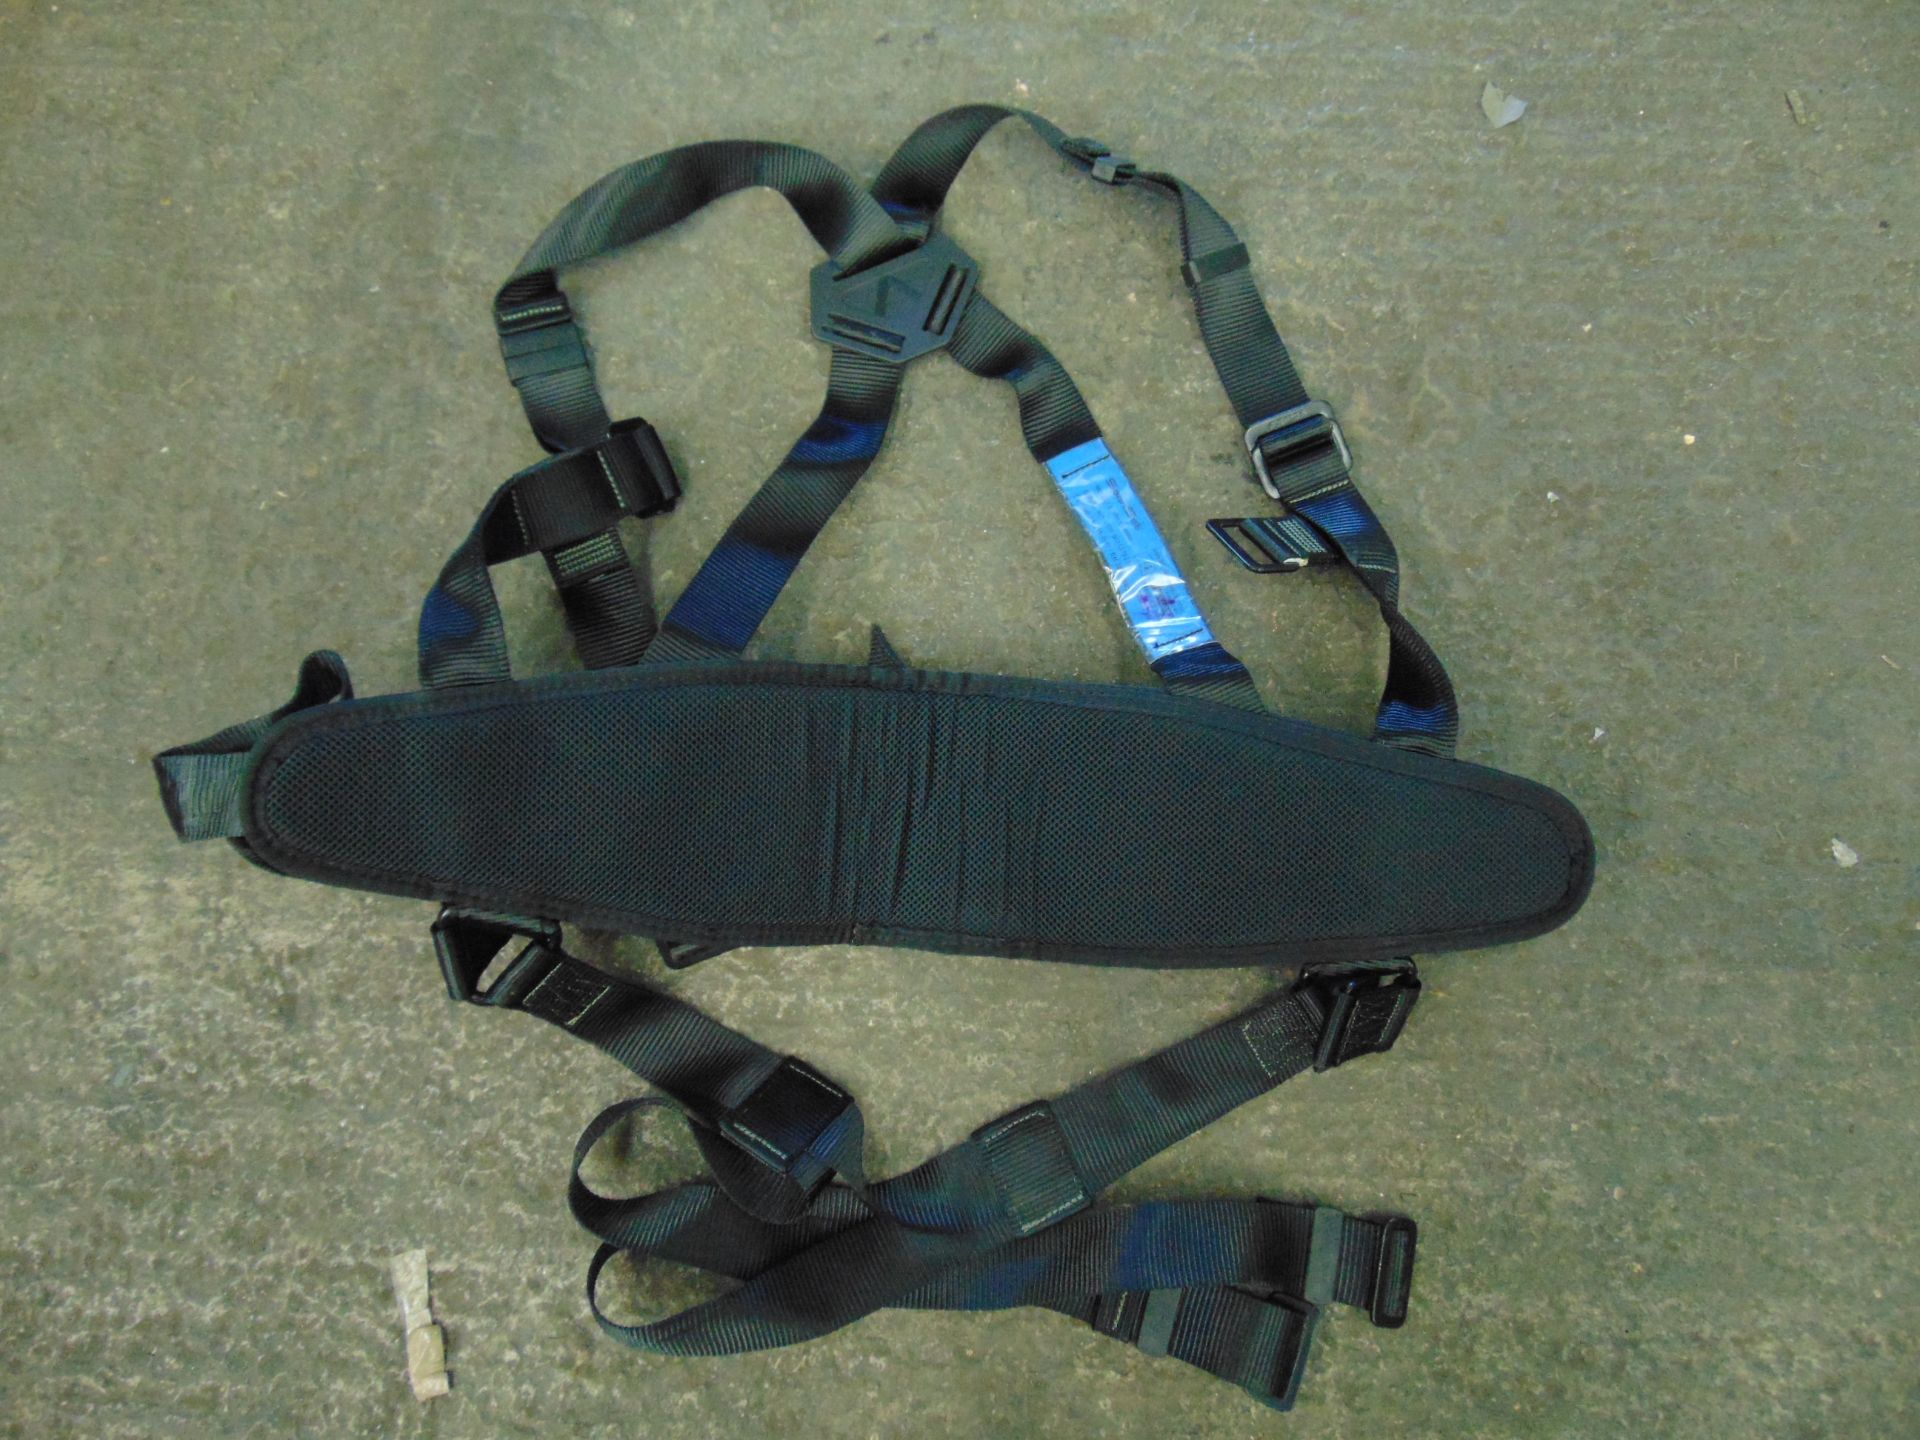 Spanset Full Body Harness with Work Position Lanyards etc - Image 17 of 24